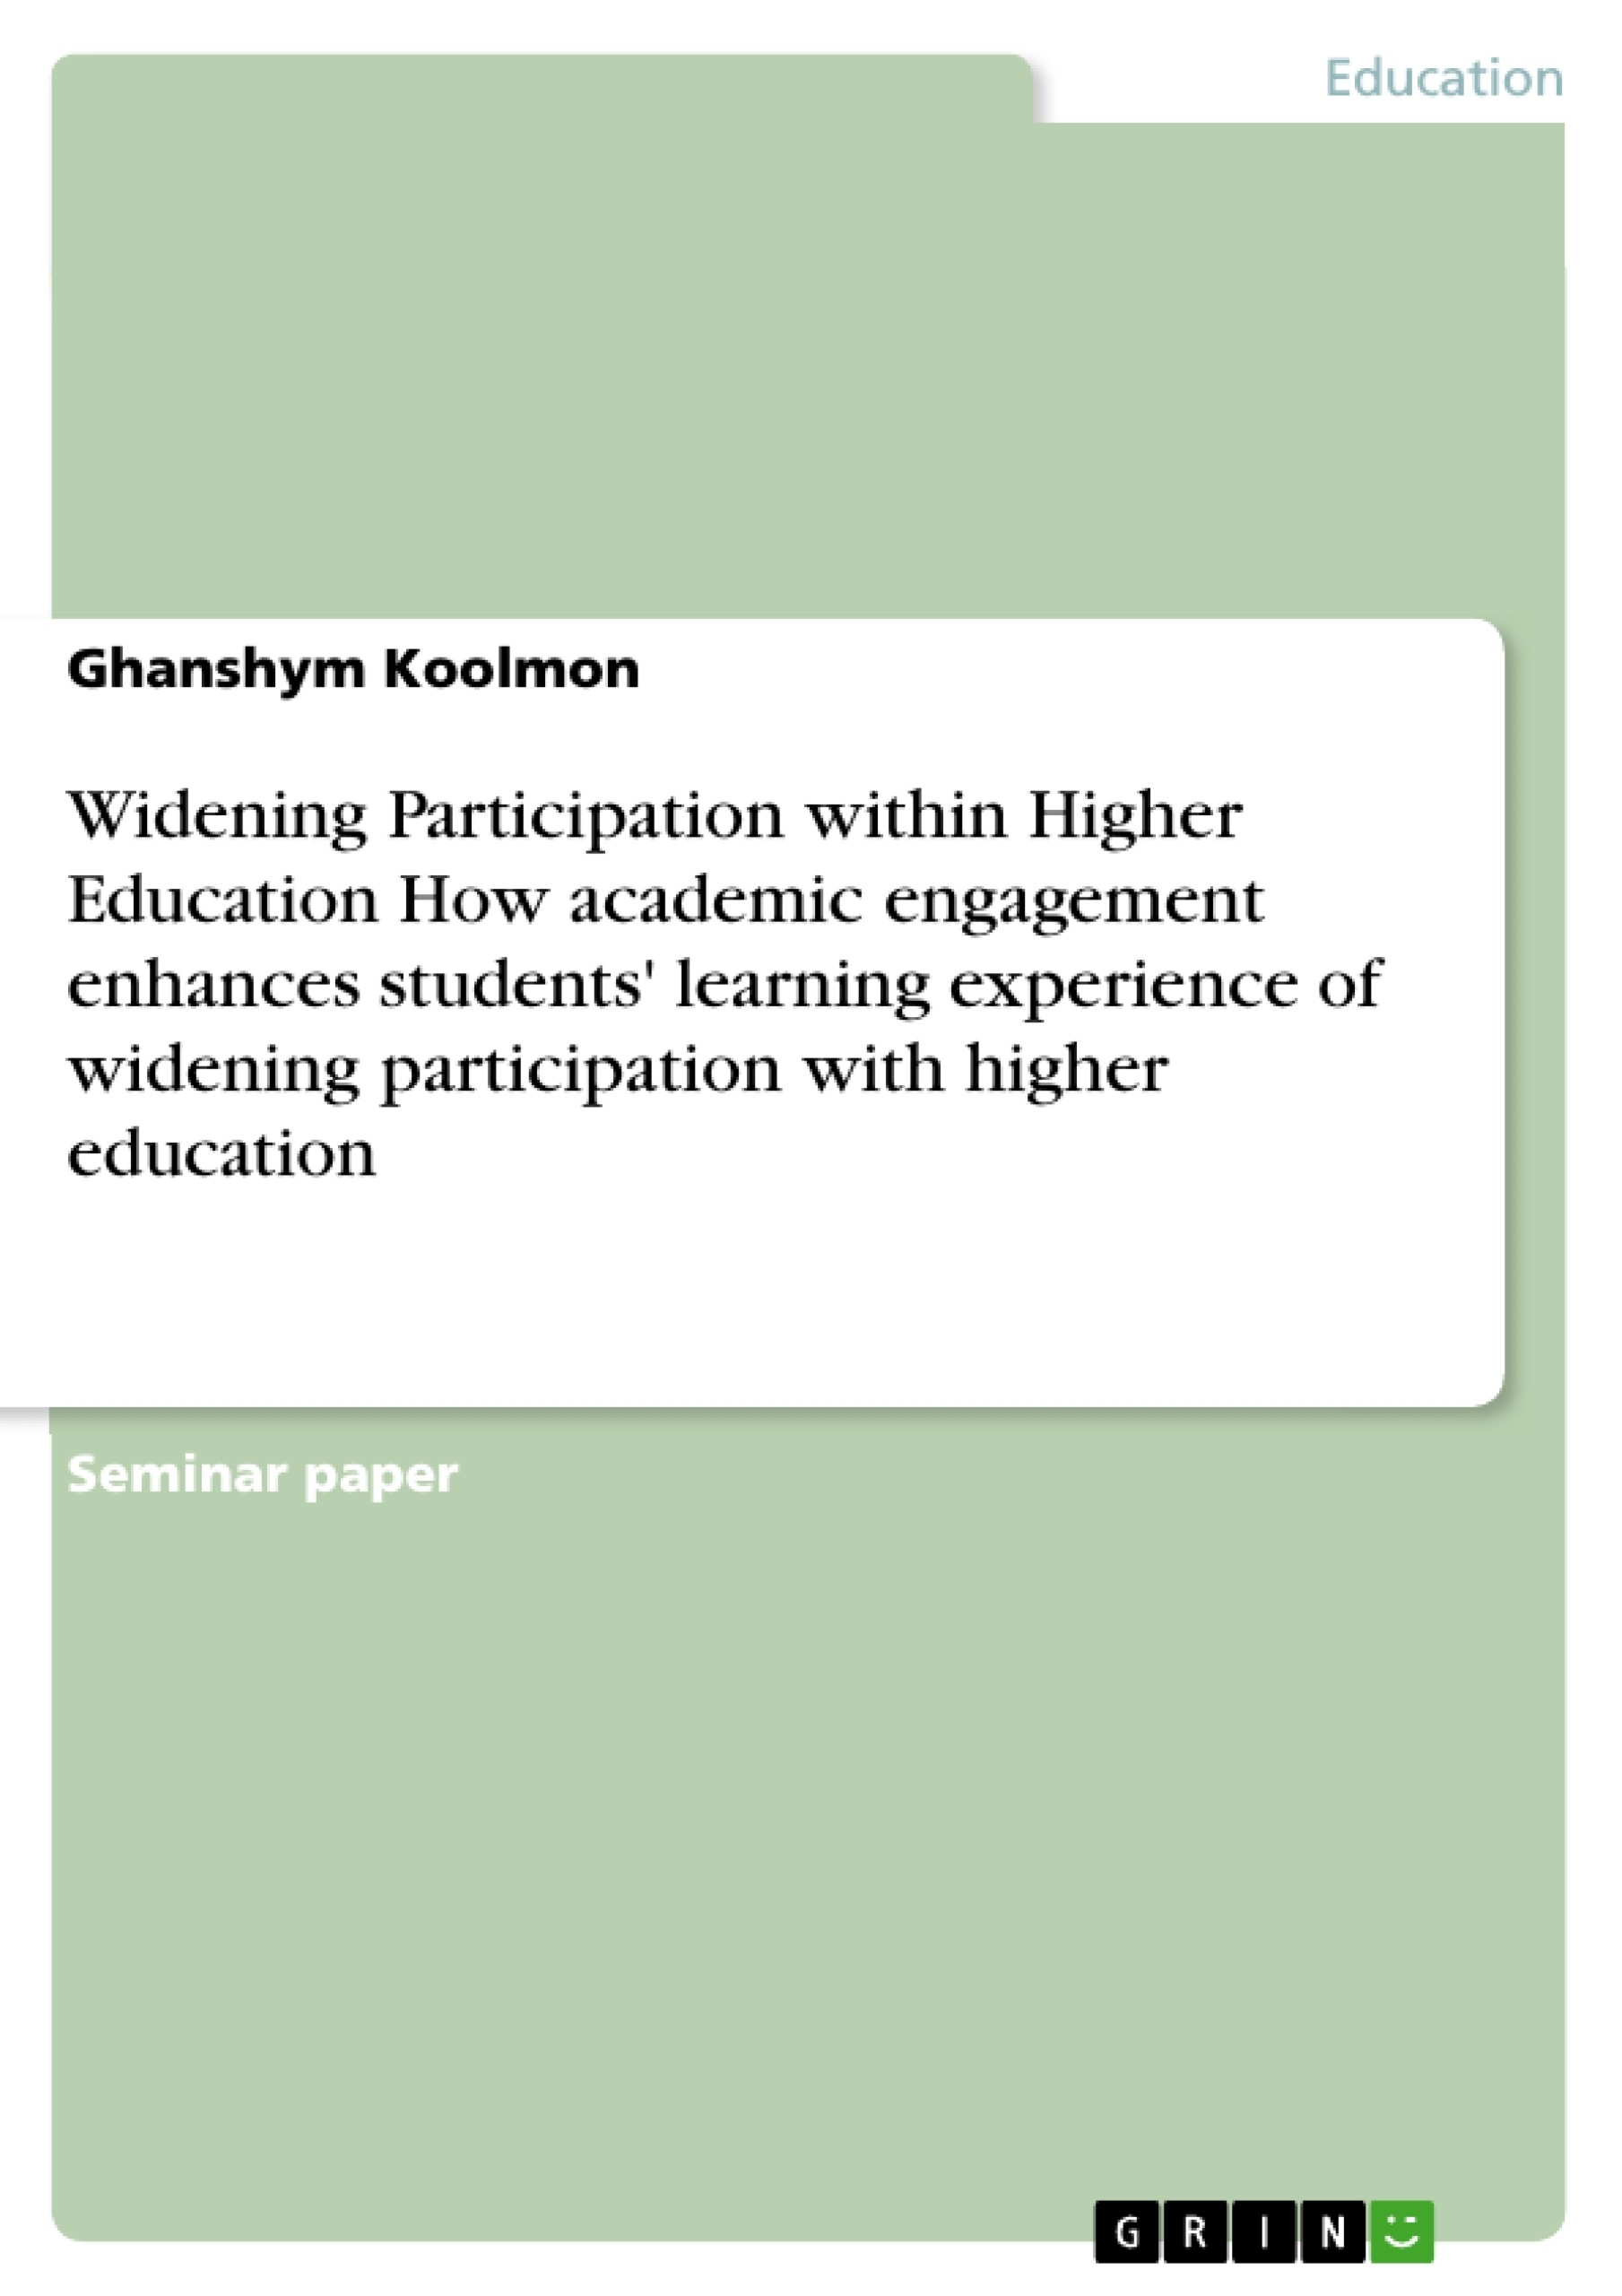 Titre: Widening Participation within Higher Education  How academic engagement enhances students' learning experience of widening participation with higher education